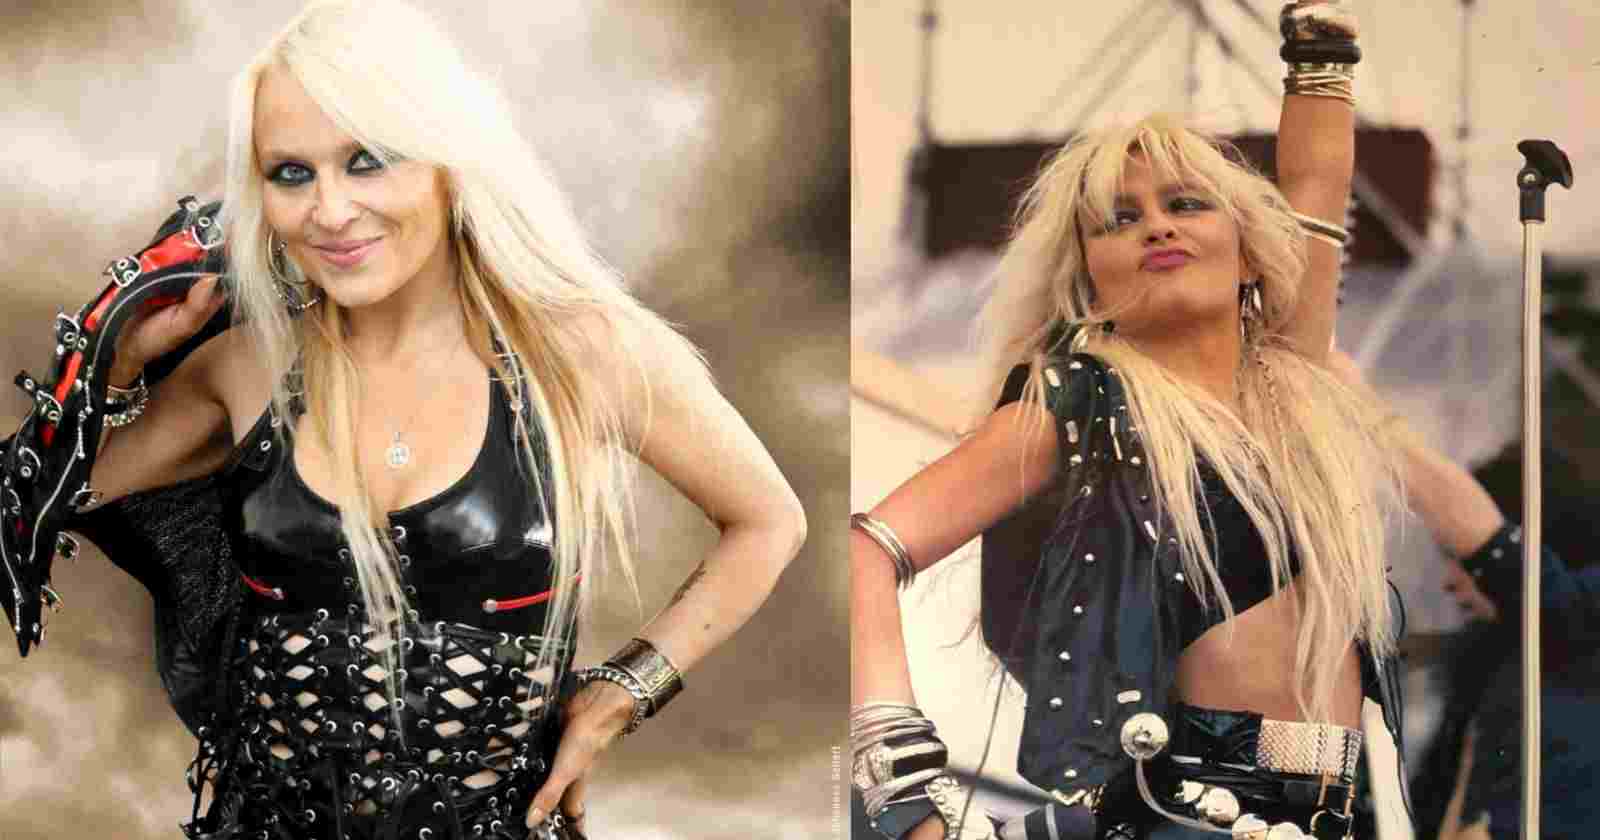 Singer Doro Pesch says she once turned down a Playboy offer